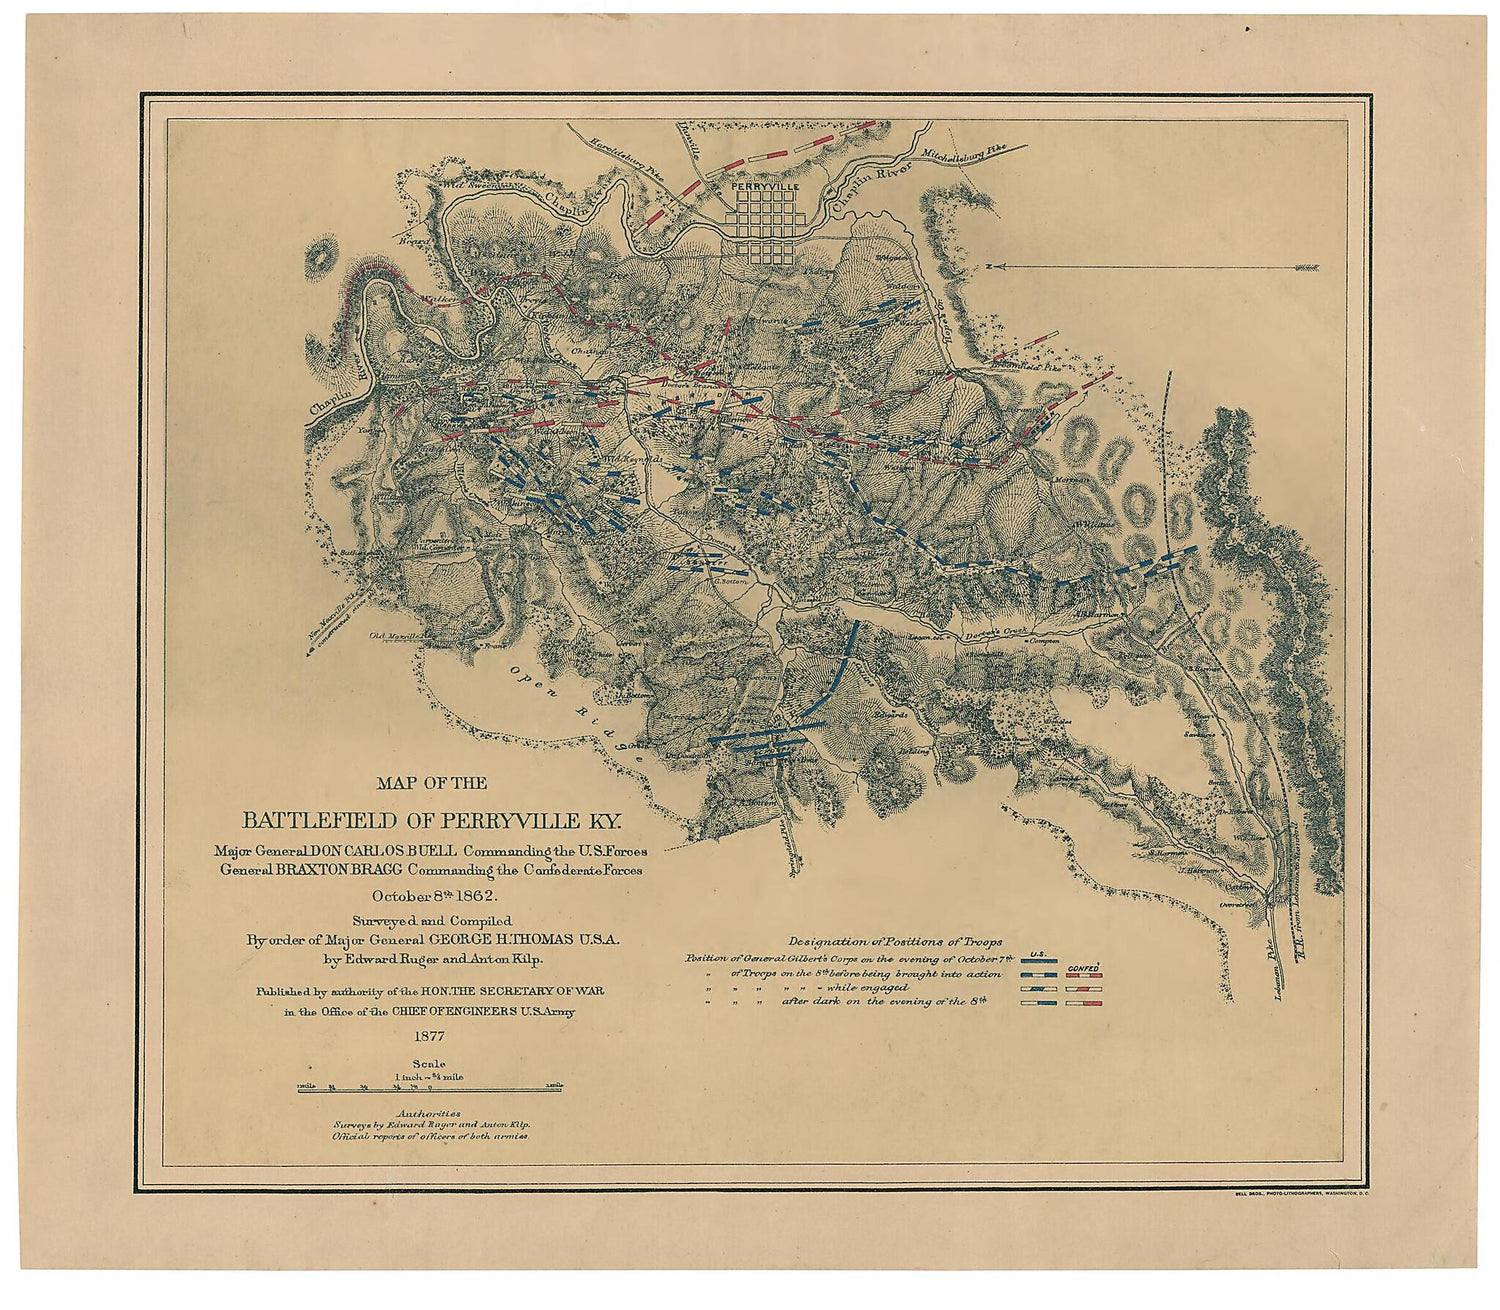 This old map of Map of the Battlefield of Perryville, Ky : Major General Don Carlos Buell Commanding the U.S. Forces, General Braxton Bragg Commanding the Confederate Forces. October 8th 1862 from 1877 was created by  Bell Bros, Anton Kilp, Edward Ruger,